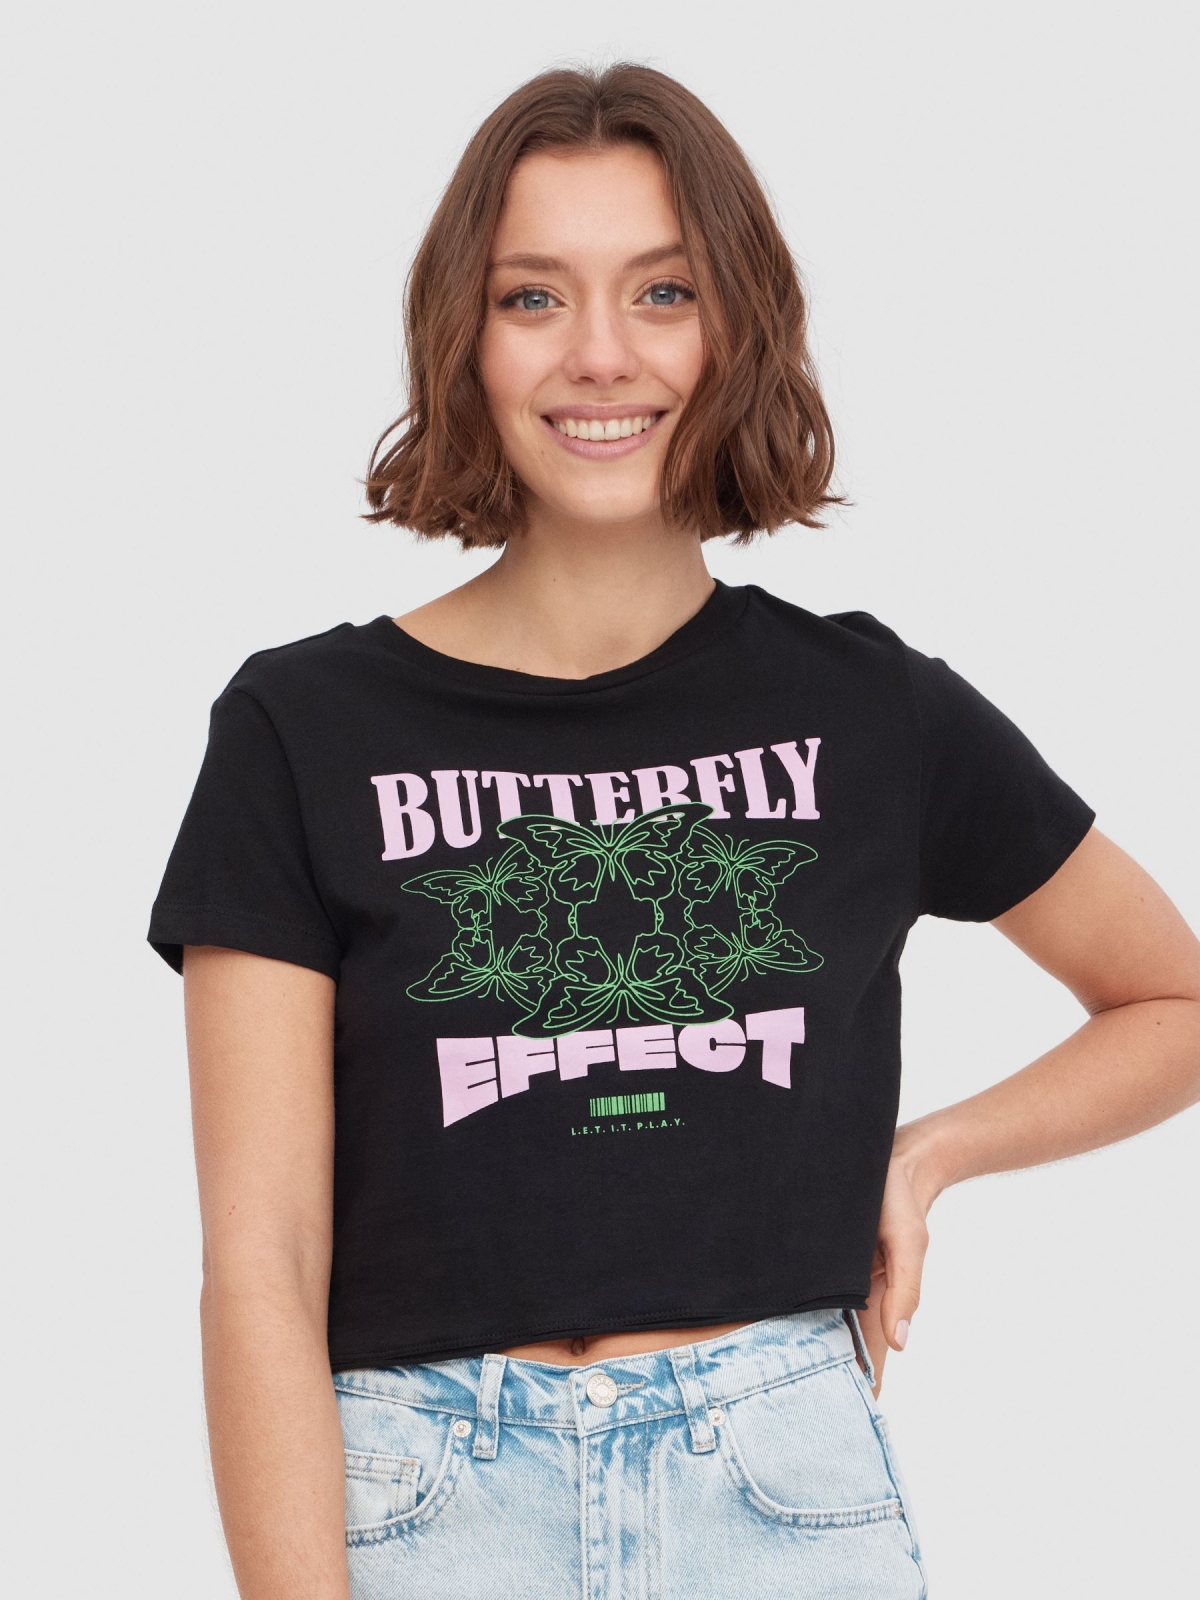 Butterfly Effect T-shirt black middle front view